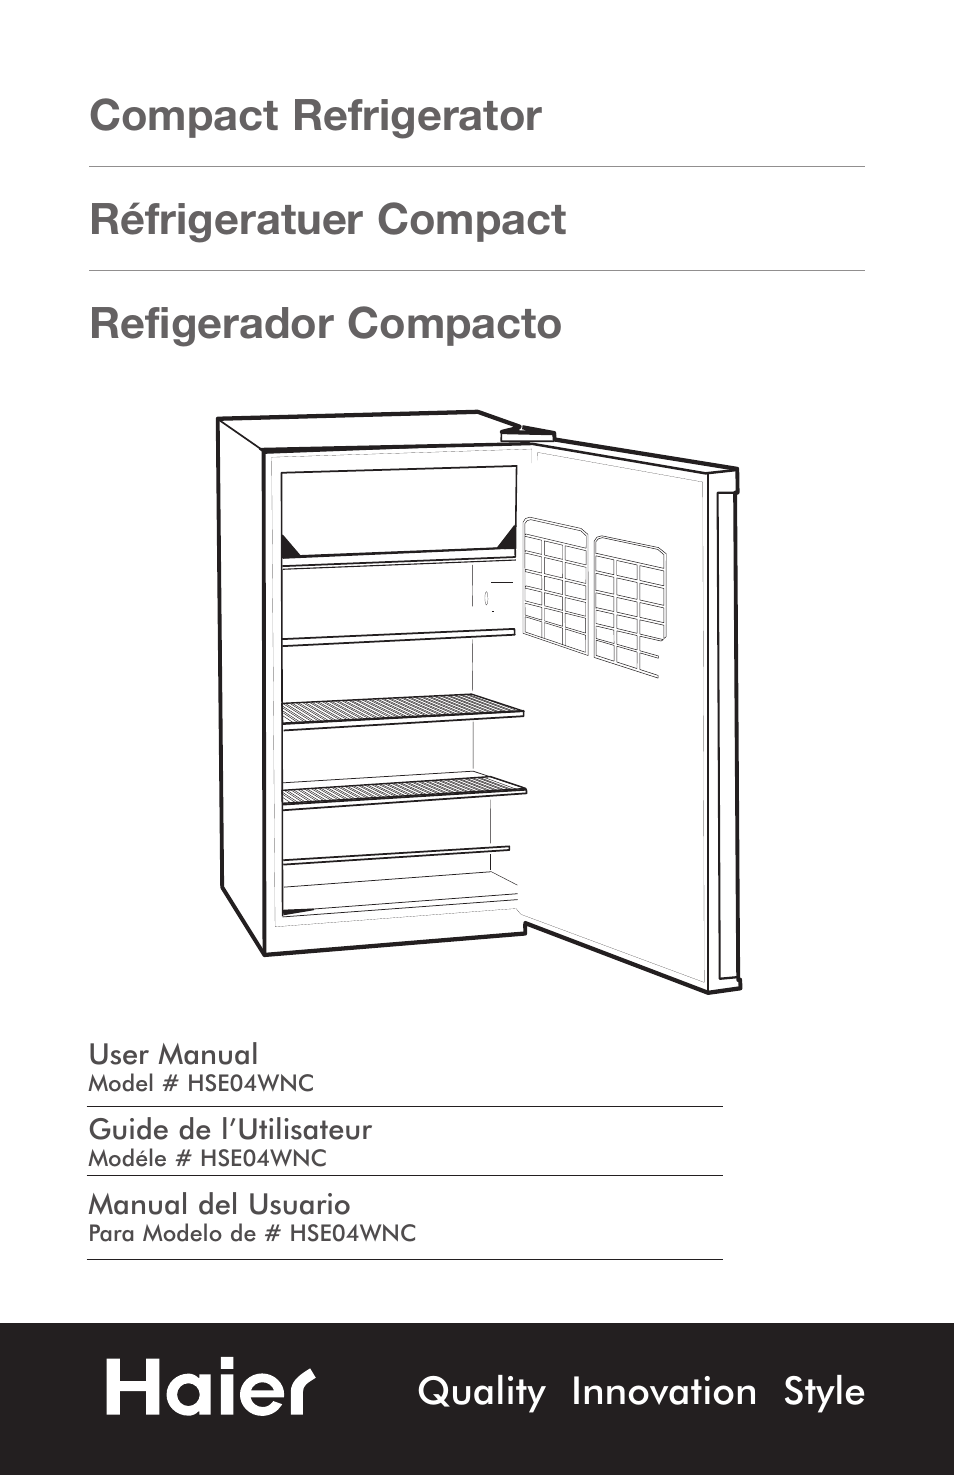 Compact Refrigerator HSE04WNC